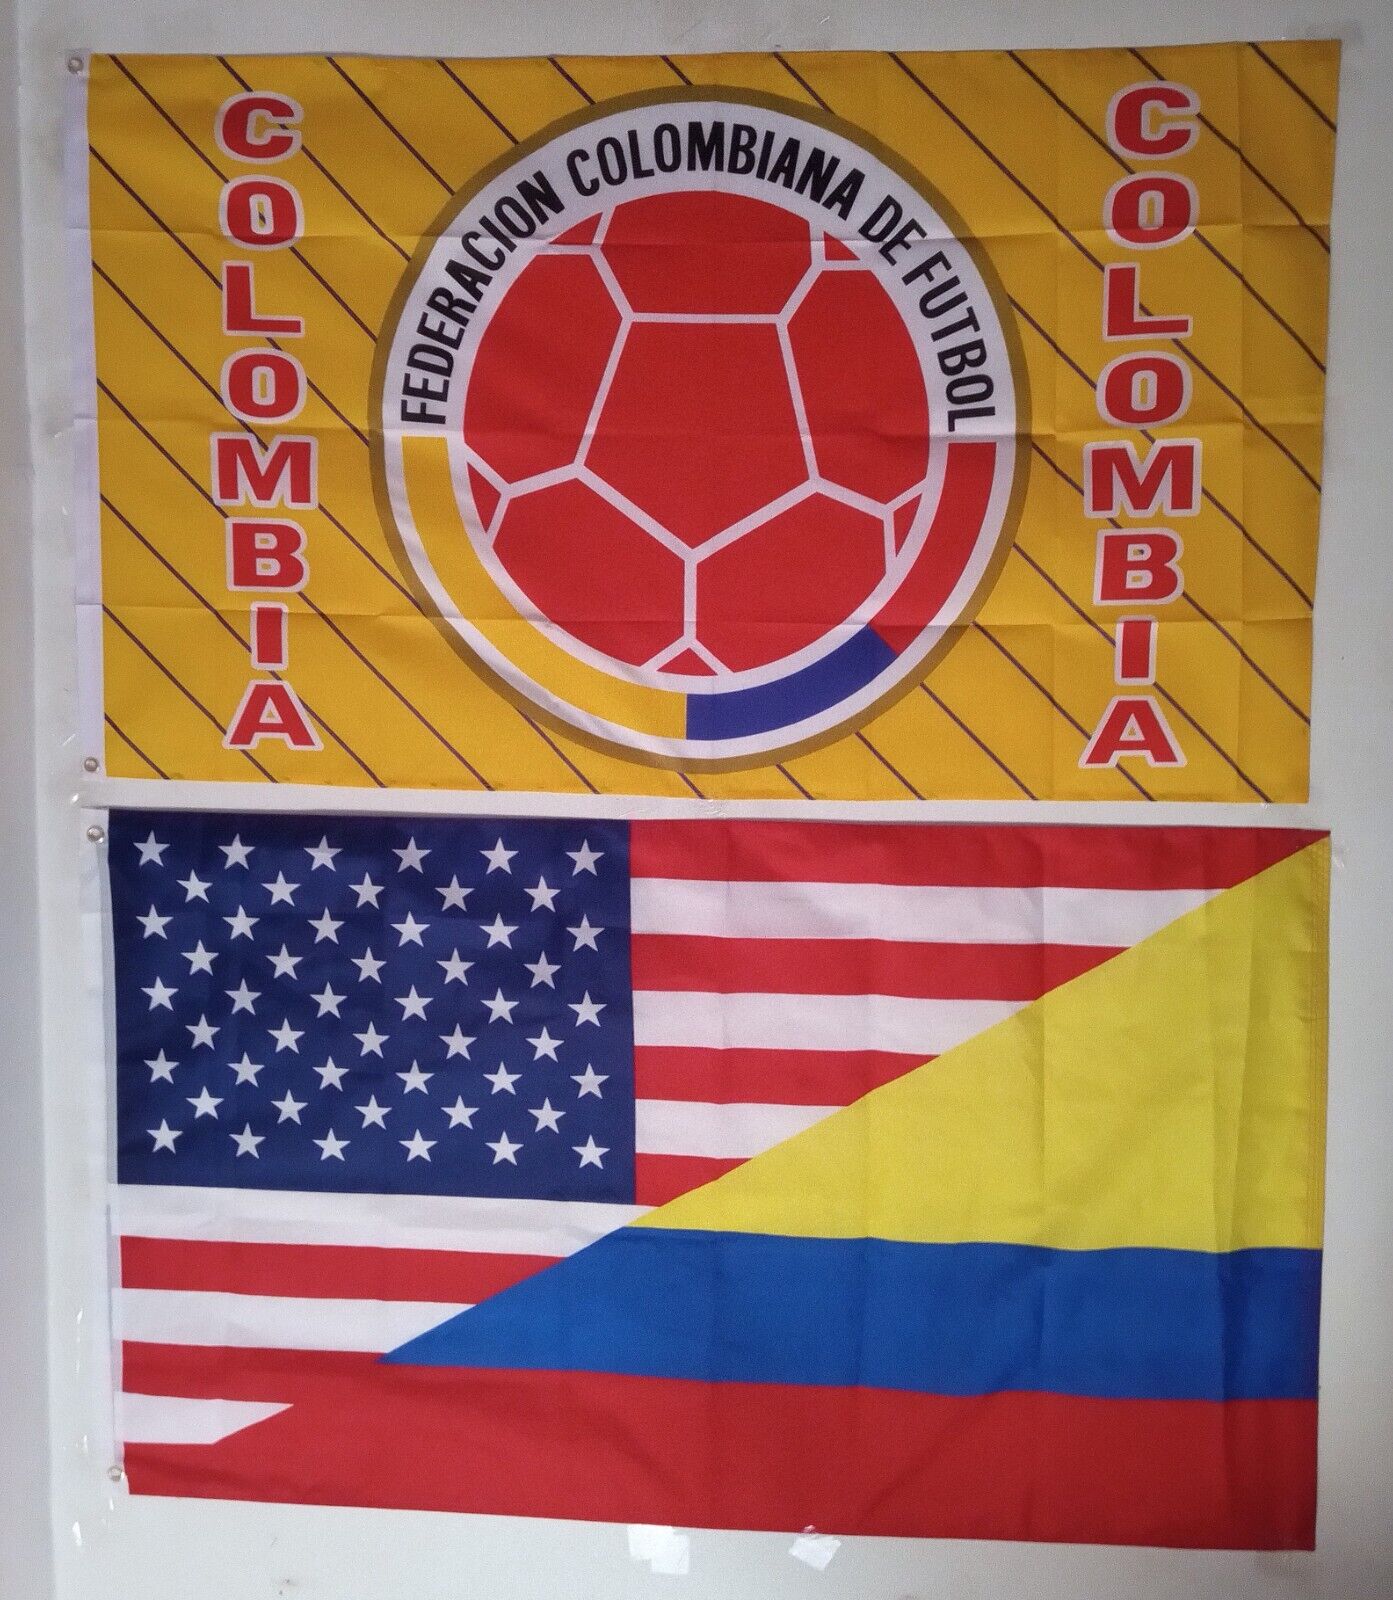 1 COLOMBIA FEDERATION FLAG + 1 COLOMBIAN-AMERICAN FLAG FOR $35